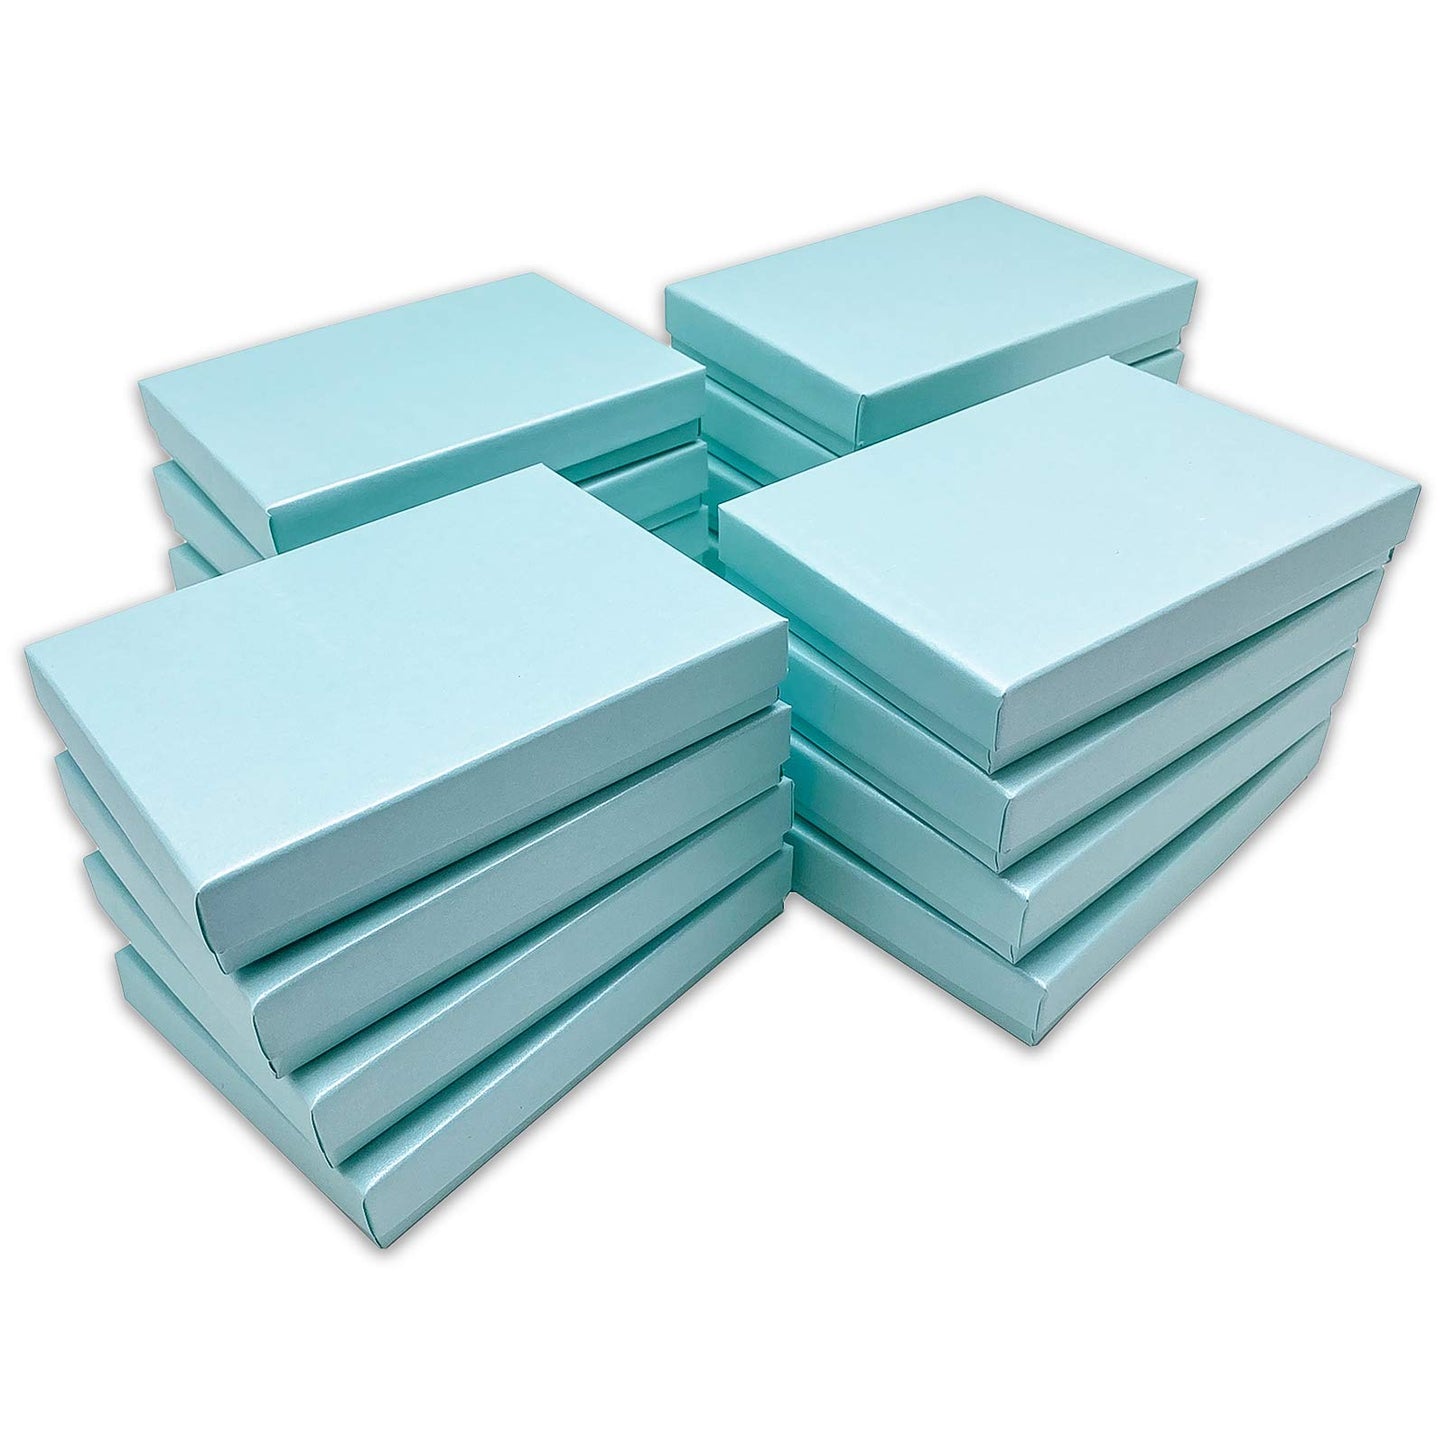 7 1/8" x 5 1/8" Light Pearl Teal Cotton Filled Paper Box